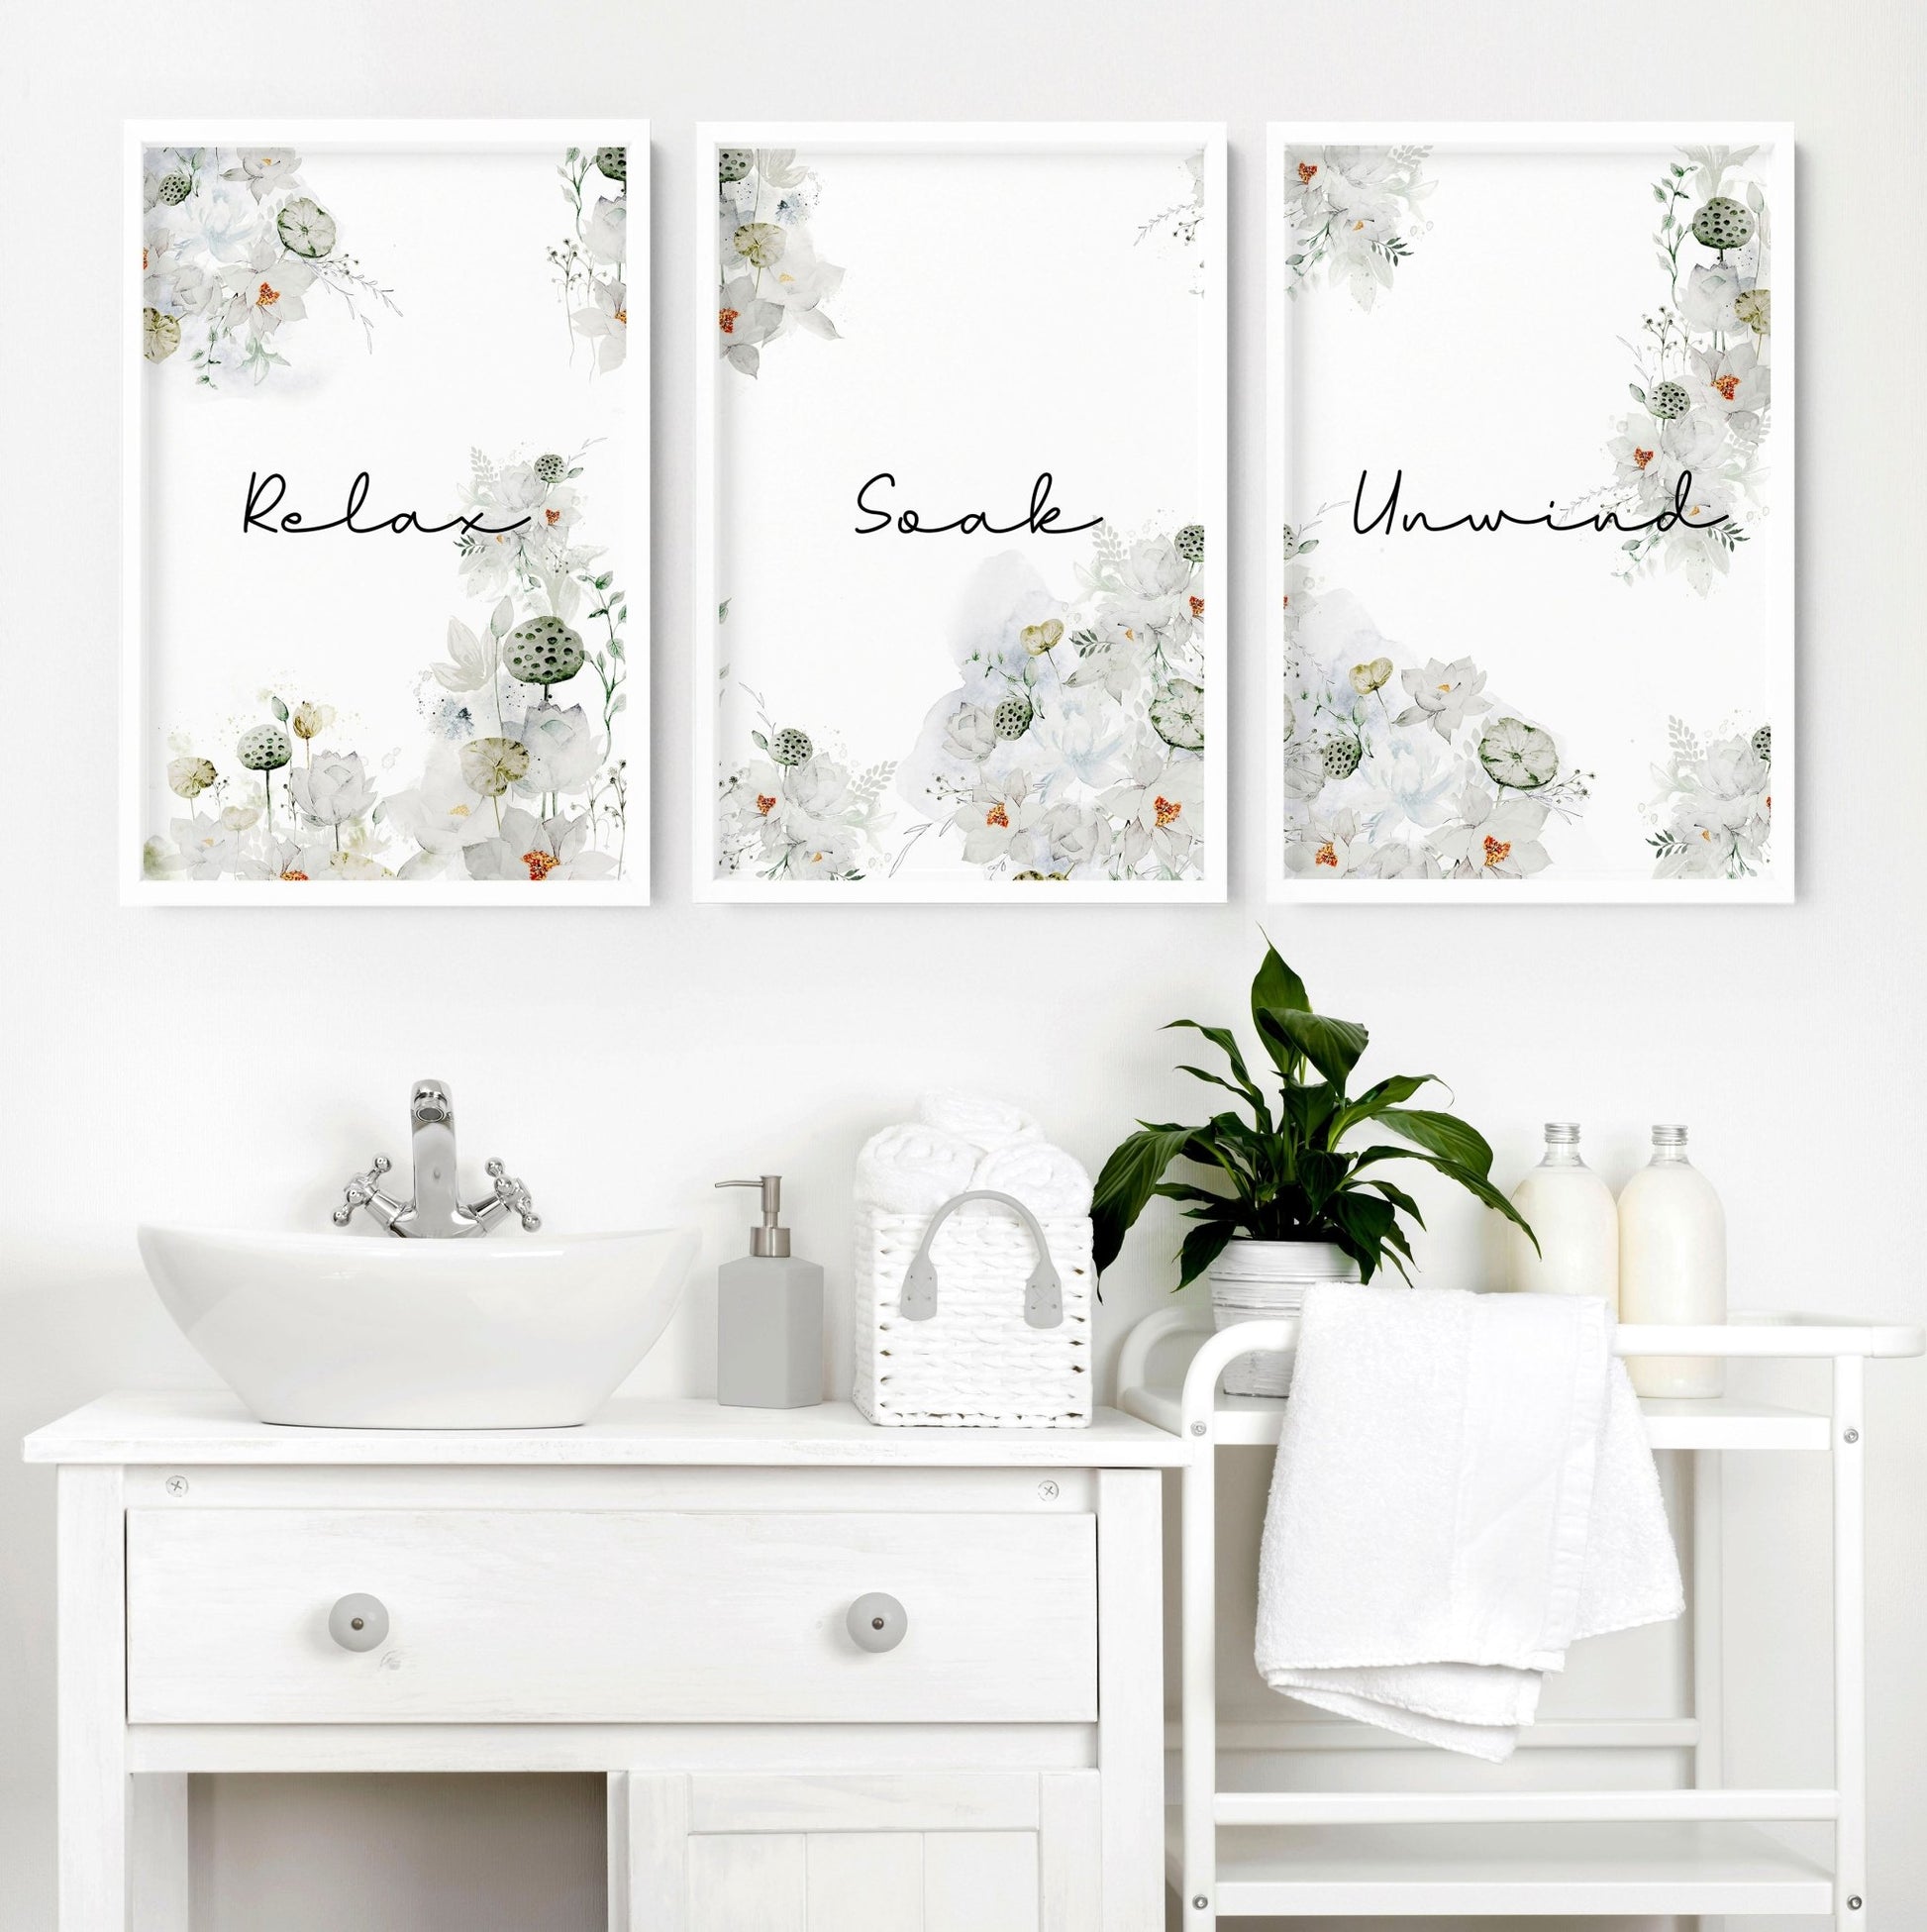 Country decor for Bathroom | Set of 3 wall art prints - About Wall Art